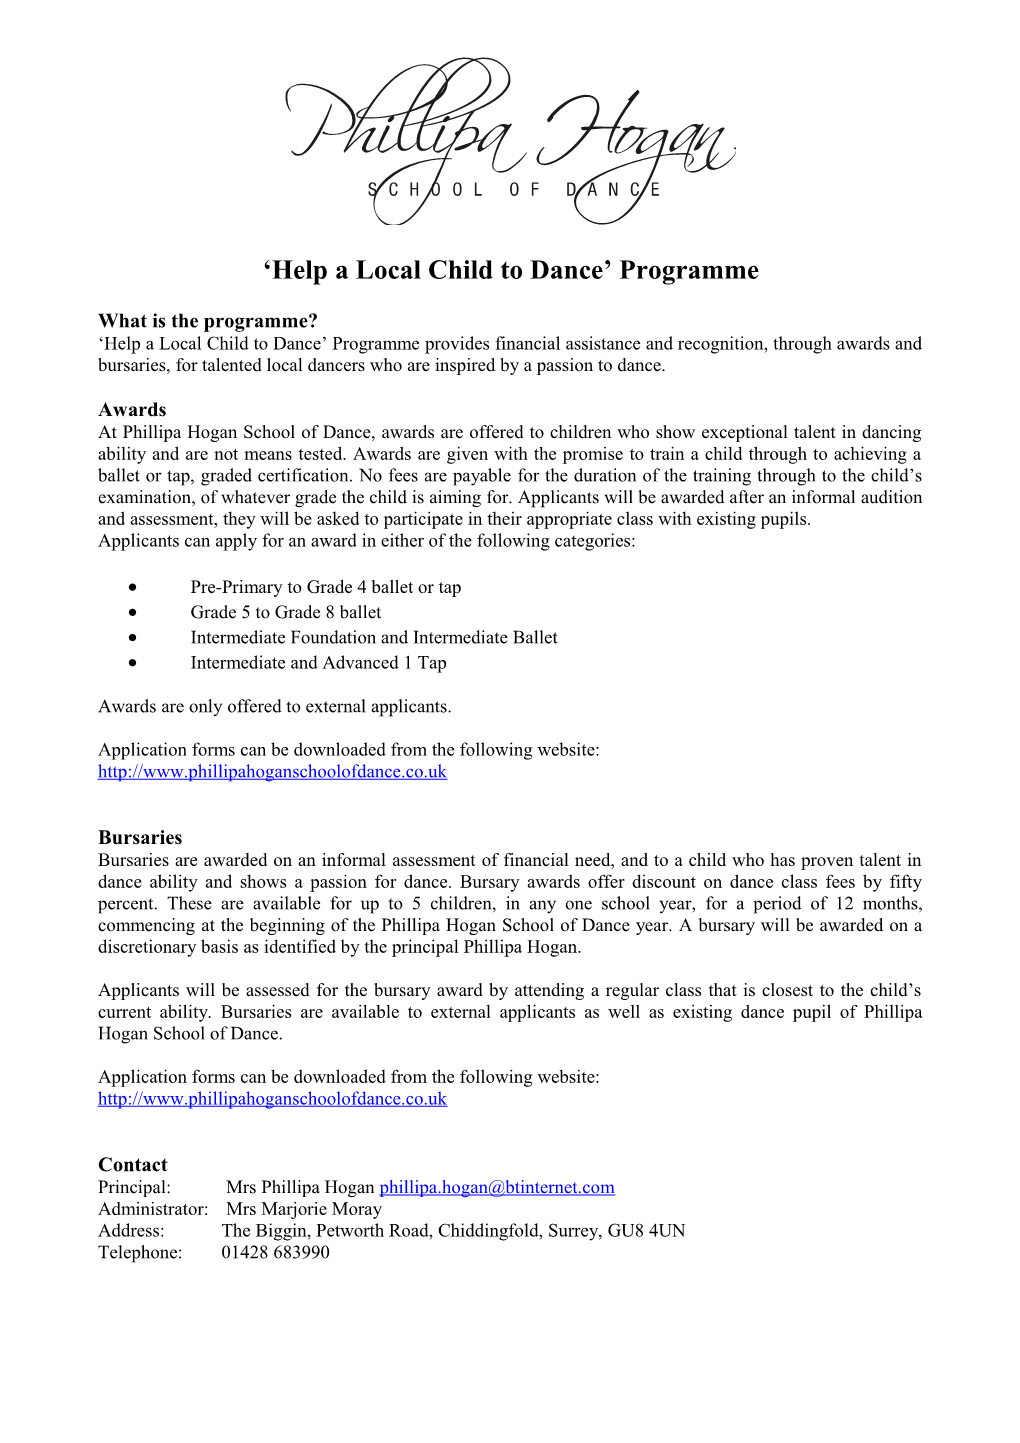 Help a Local Child to Dance Programme